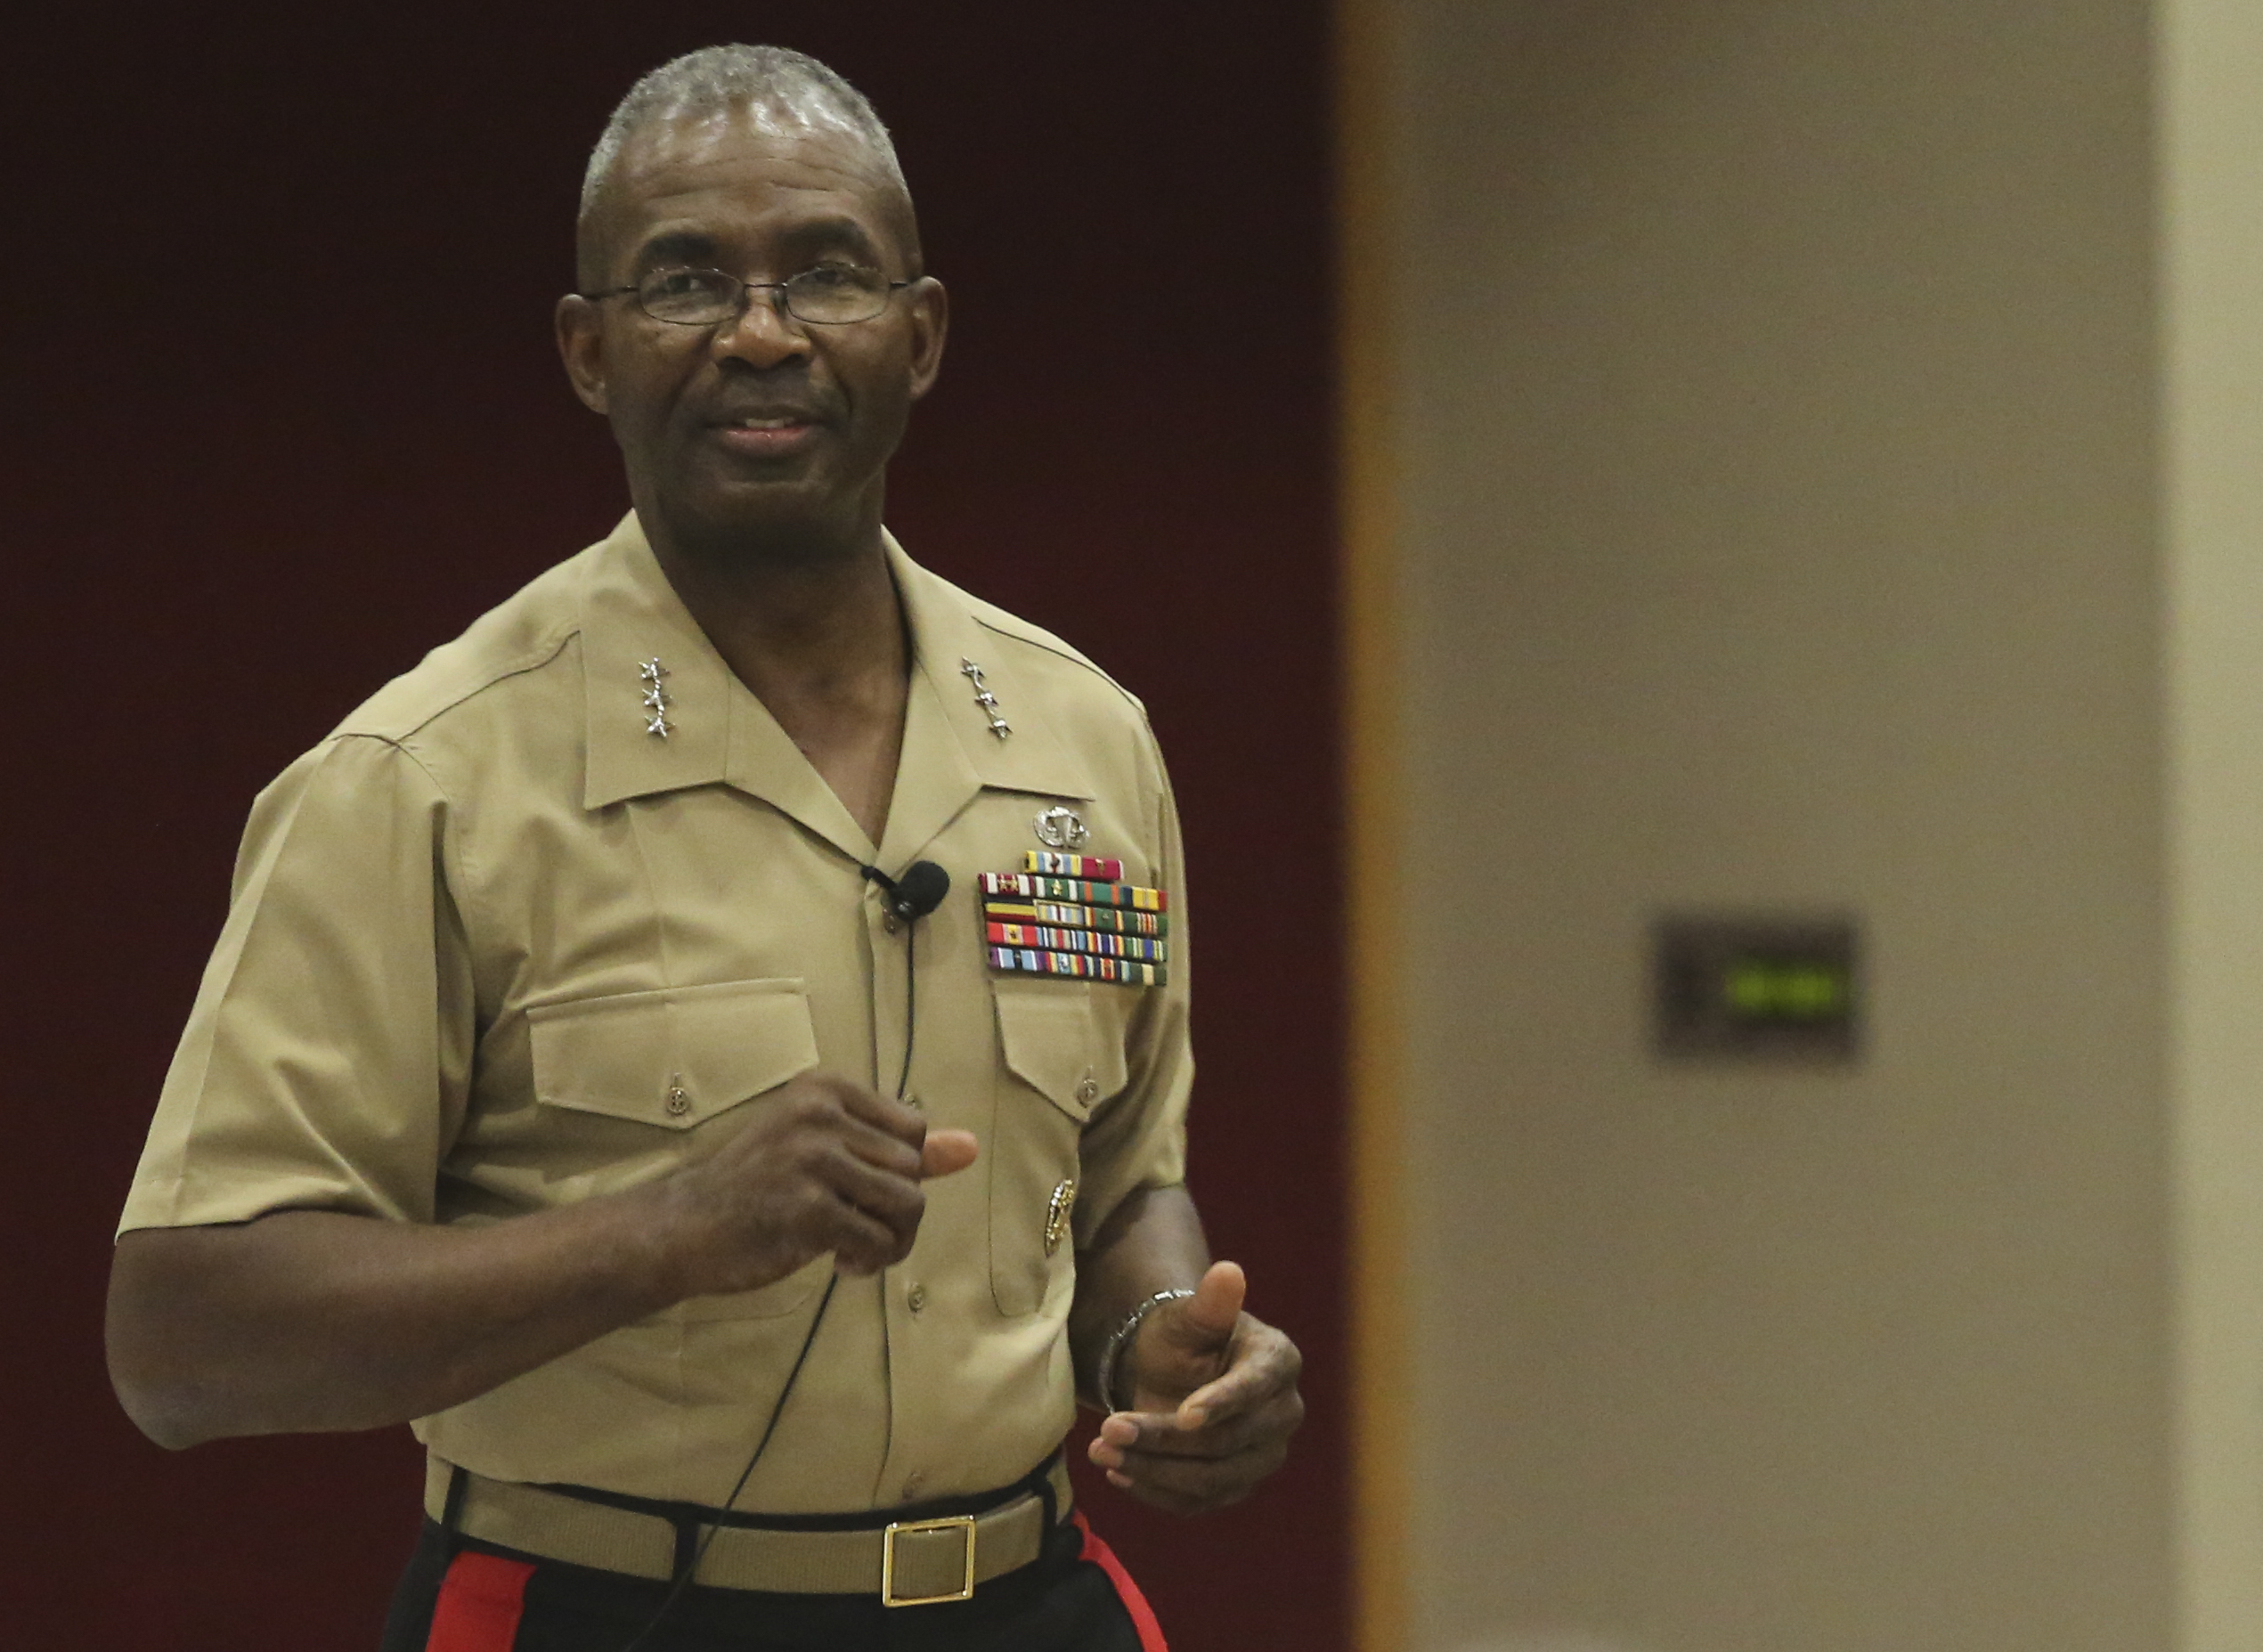 Lt. Gen. Ronald L. Bailey, left, Deputy Commandant of Plans, Policies and Operations and alumnus of Austin Peay State University, speaks to students of the Marine Corps Leadership Seminar at the college in Clarksville, Tenn., Sept. 8, 2016. US Marine Corps Photo